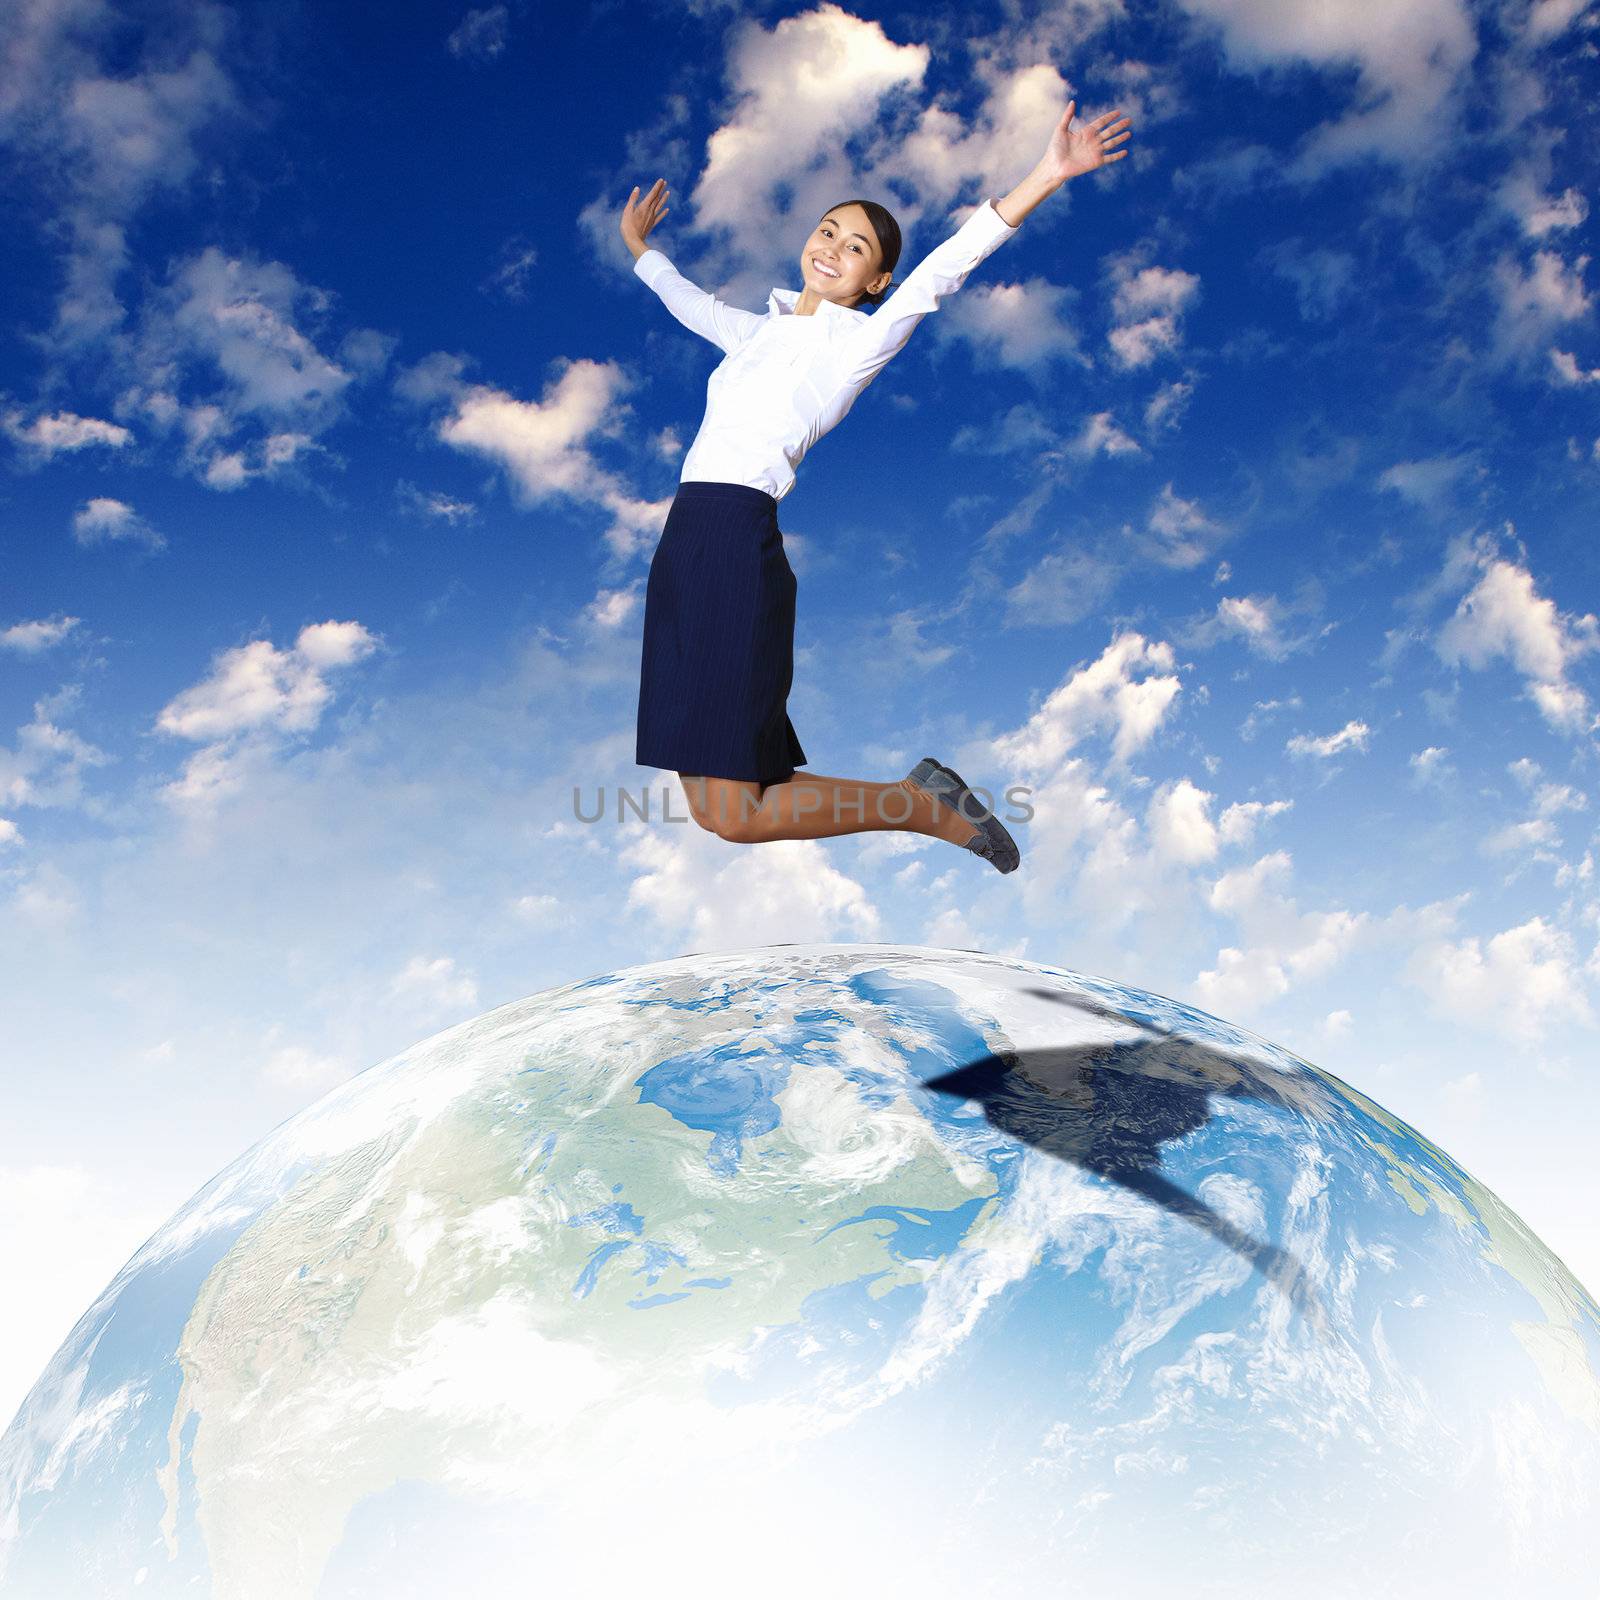 Business woman jumping up above the planet Earth